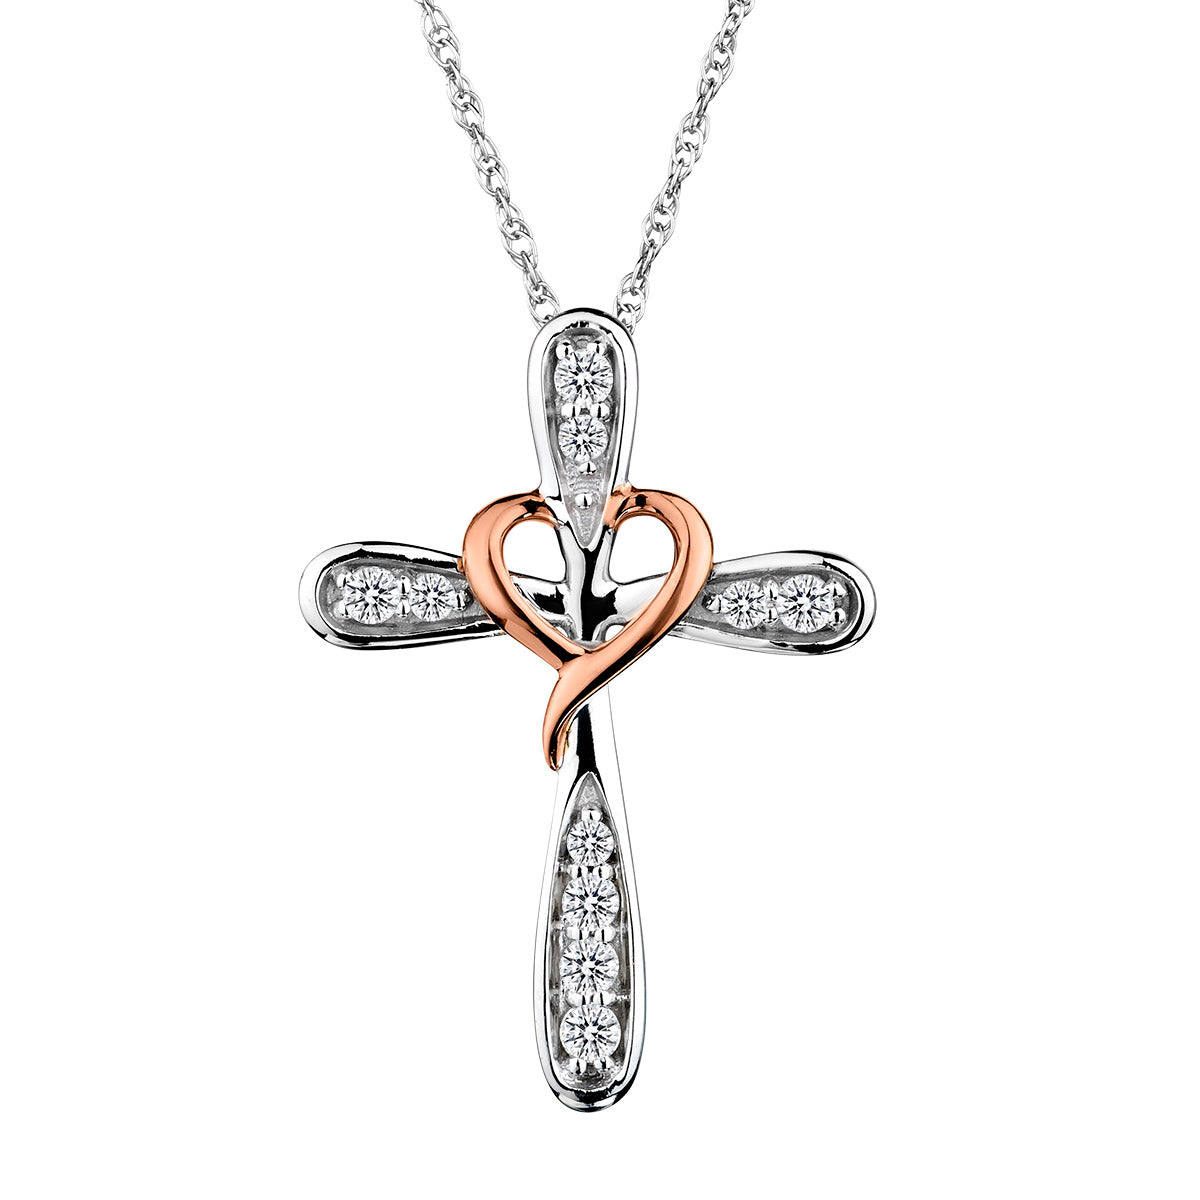 .10 Carat Heart & Cross Diamond Pendant,  10kt White & Rose Gold (Two Tone). Necklaces and Pendants. Griffin Jewellery Designs.